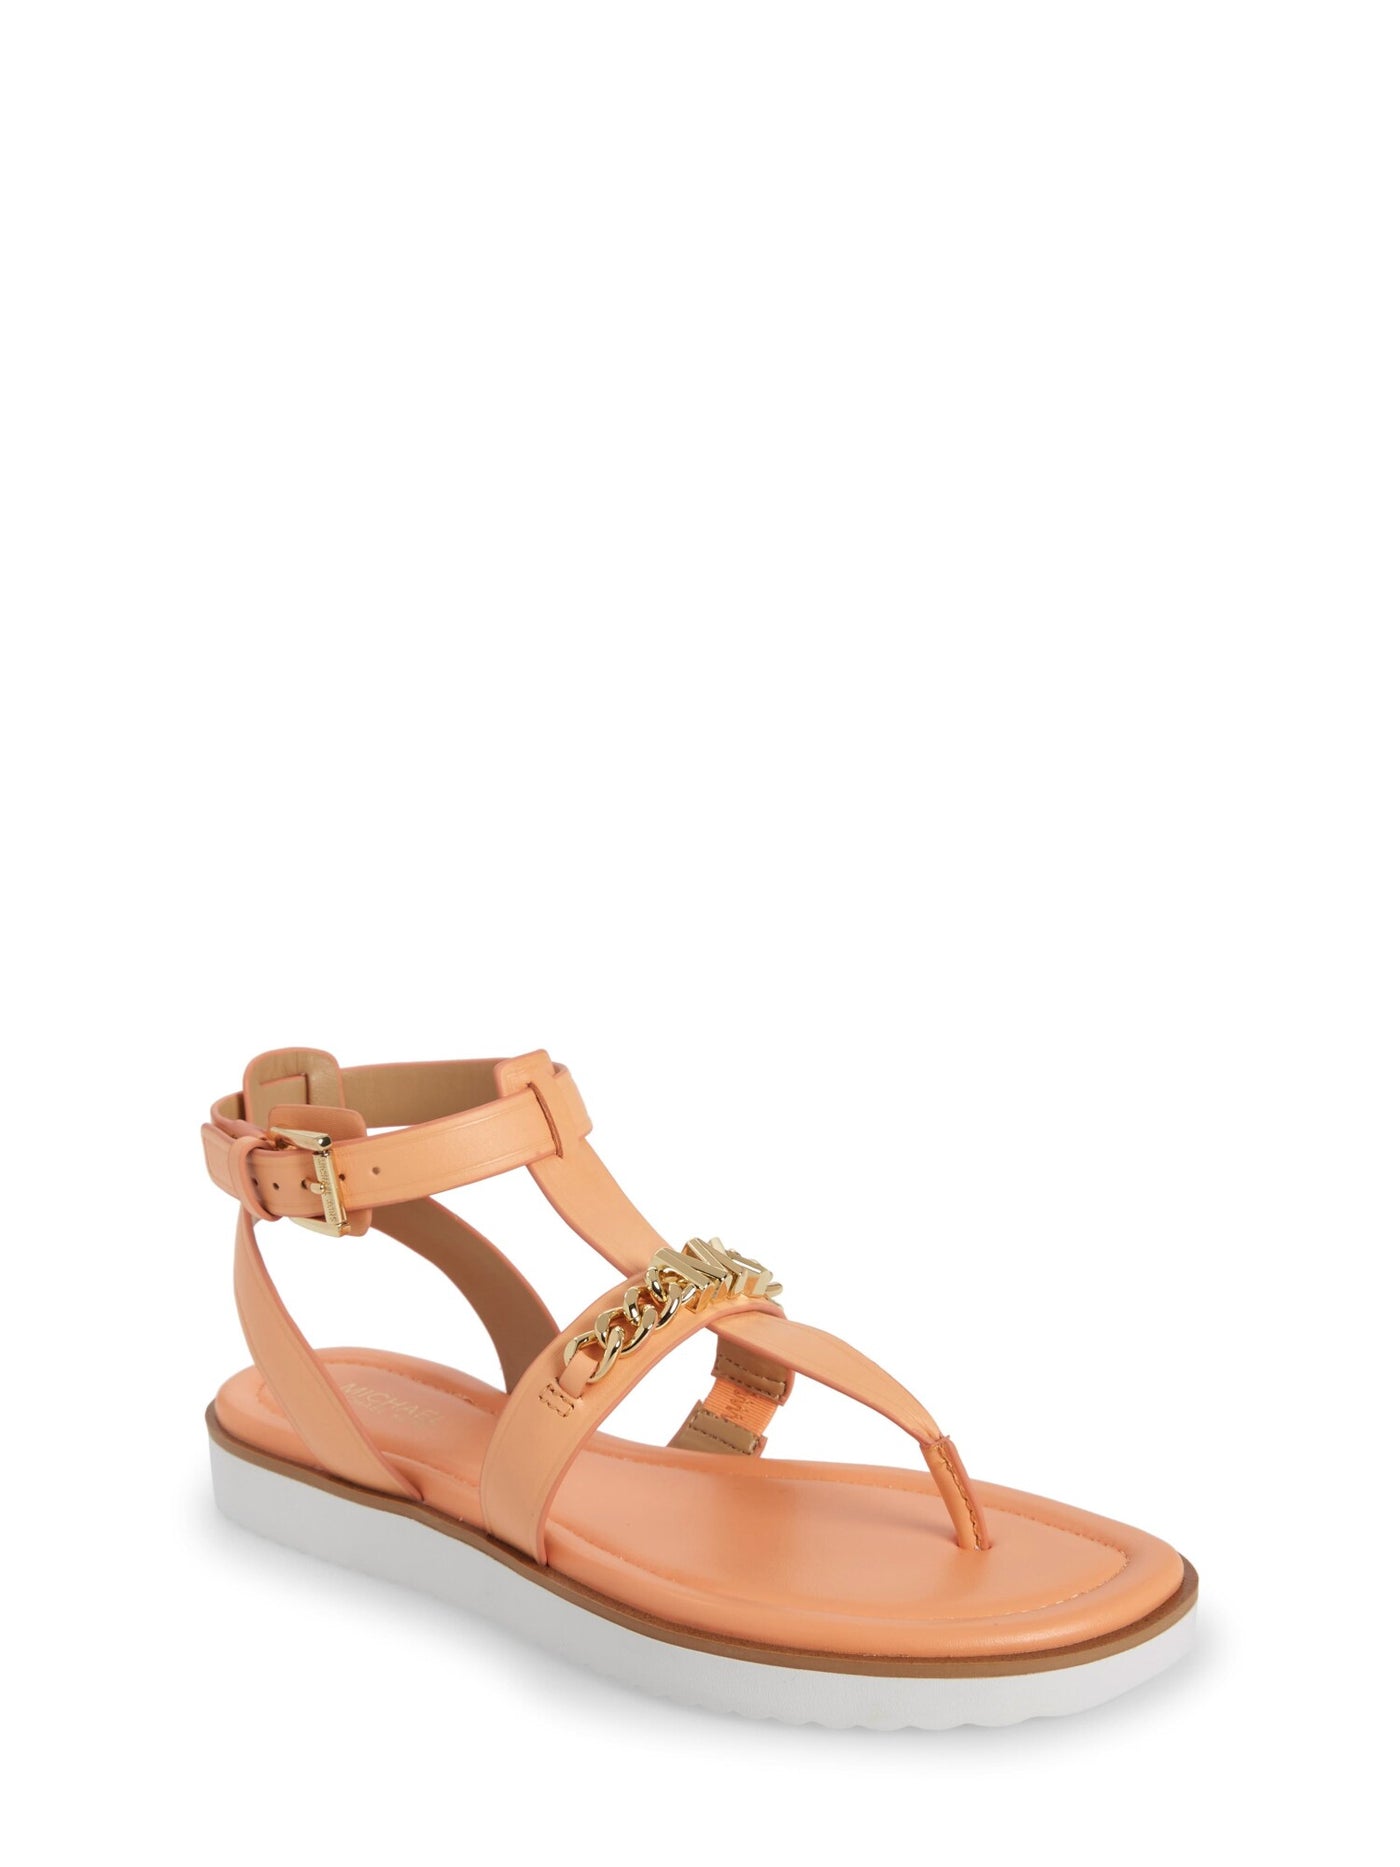 MICHAEL MICHAEL KORS Womens Orange Logo Hardware Chain Accent T-Strap Ankle Strap Farrow Round Toe Buckle Leather Gladiator Sandals Shoes 7.5 M